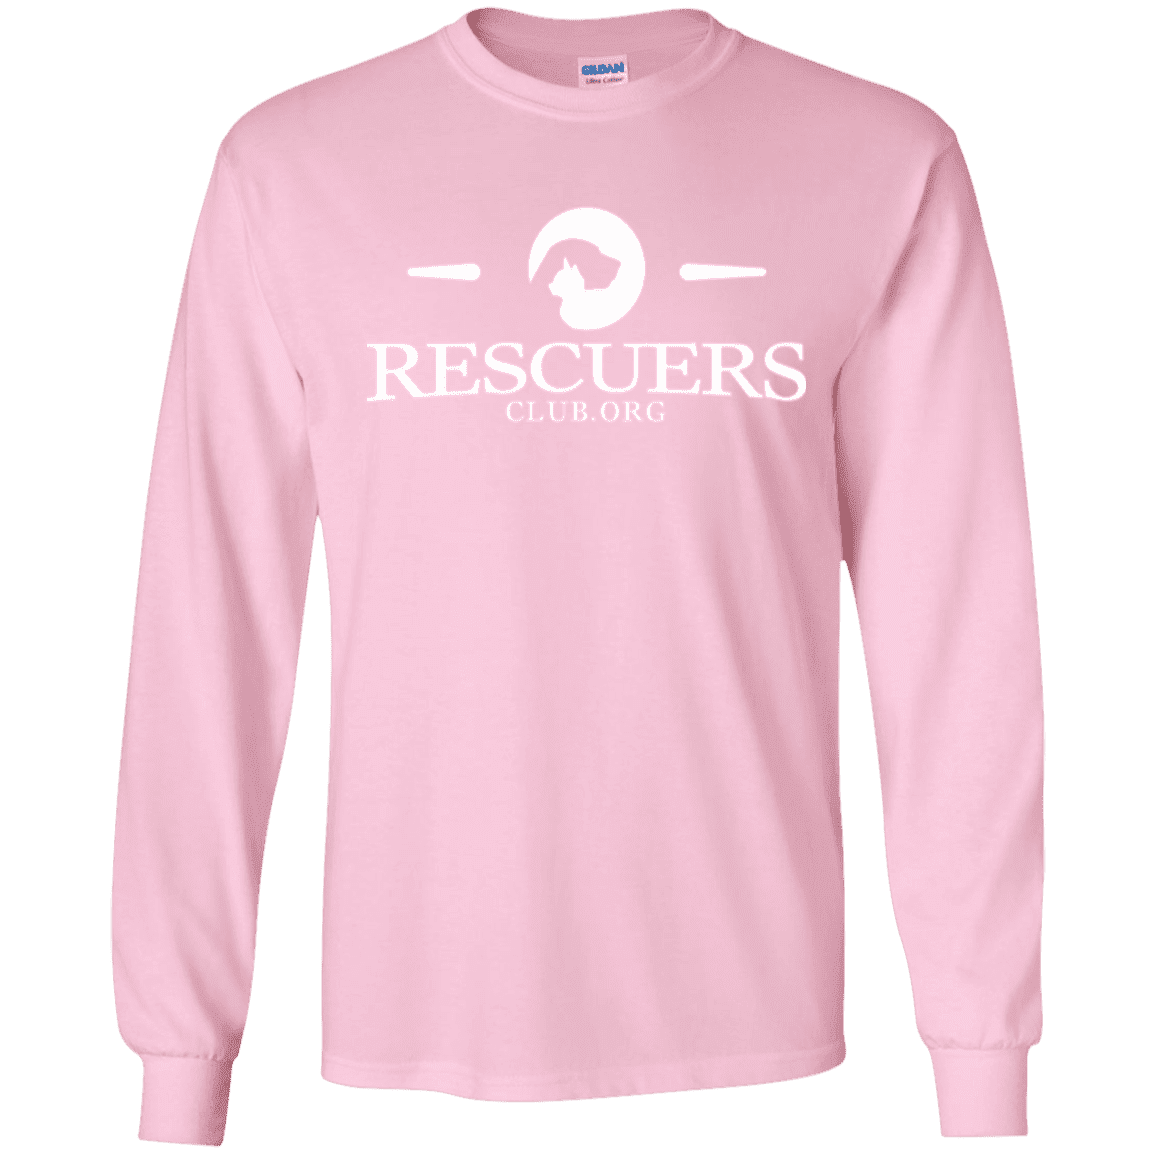 Rescuers Club Official Logo - Long Sleeve T Shirt.